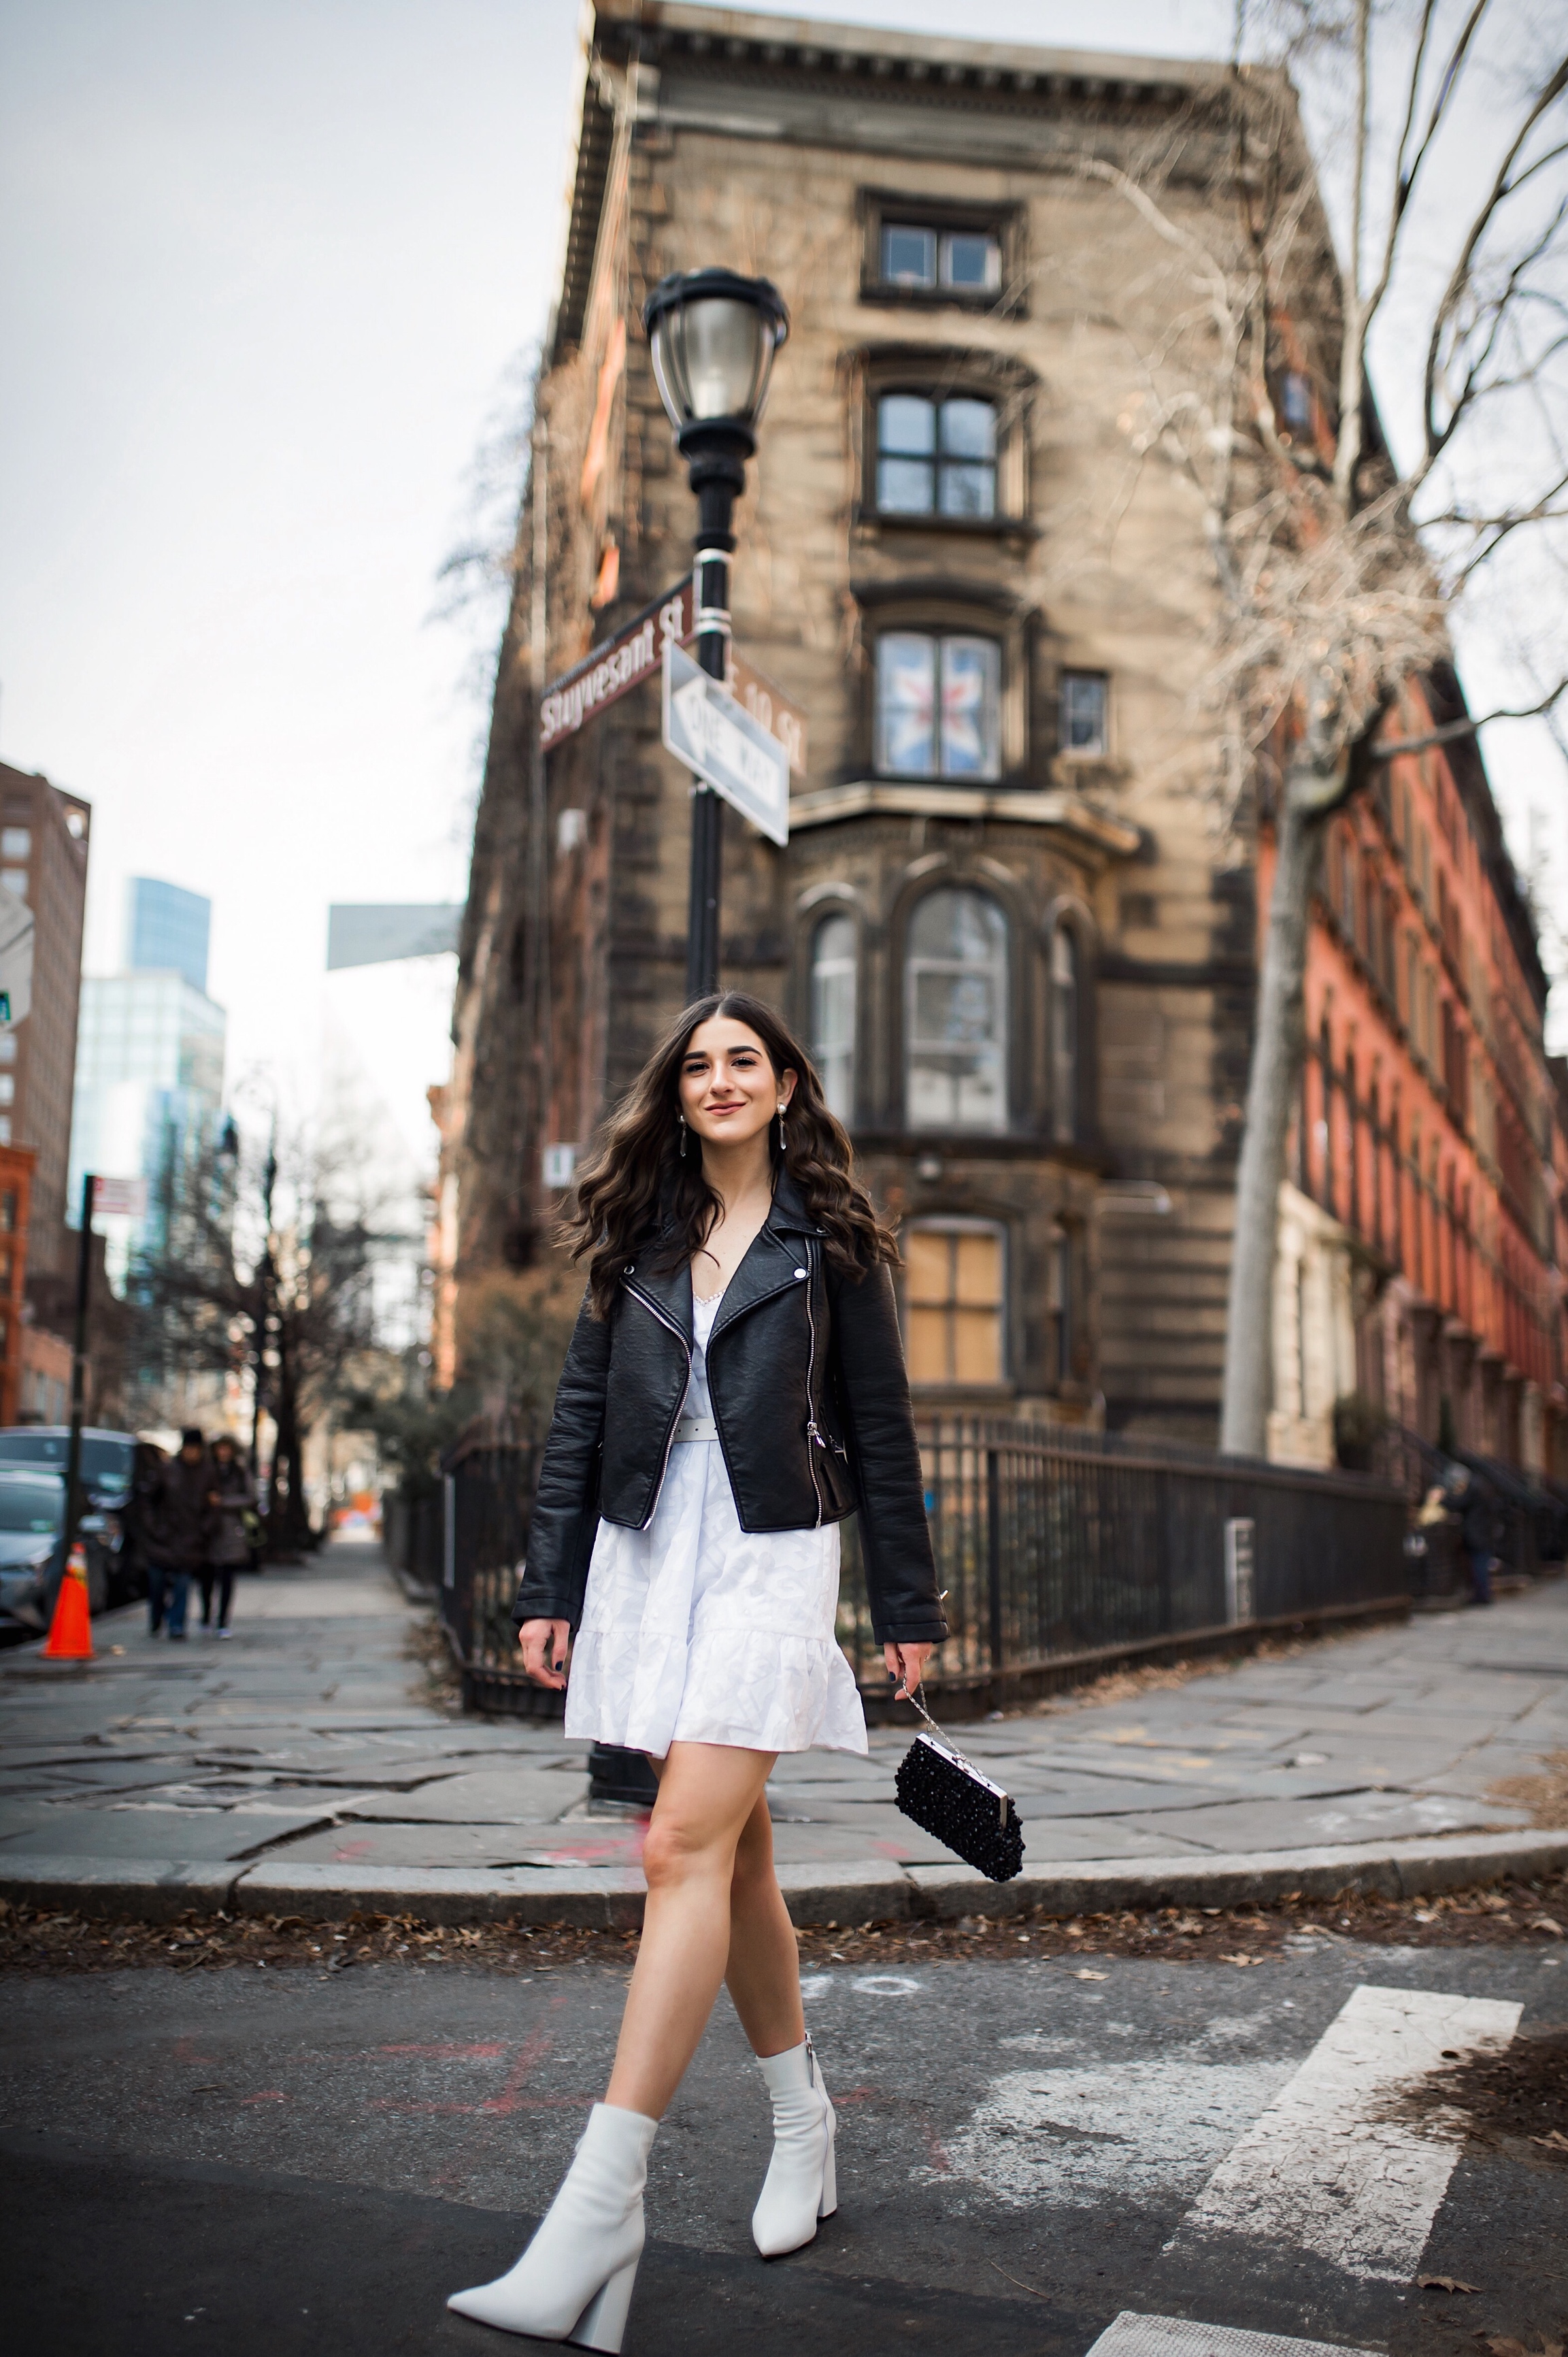 5 Things I Wish Brands Knew White Dress Leather Jacket Esther Santer Fashion Blog NYC Street Style Blogger Outfit OOTD Trendy Shopping Girl What How To Wear Urban Outfitters ASOS  Belt Booties Black Beaded Clutch Long Hair Photoshoot Stuyvesant Shop.JPG